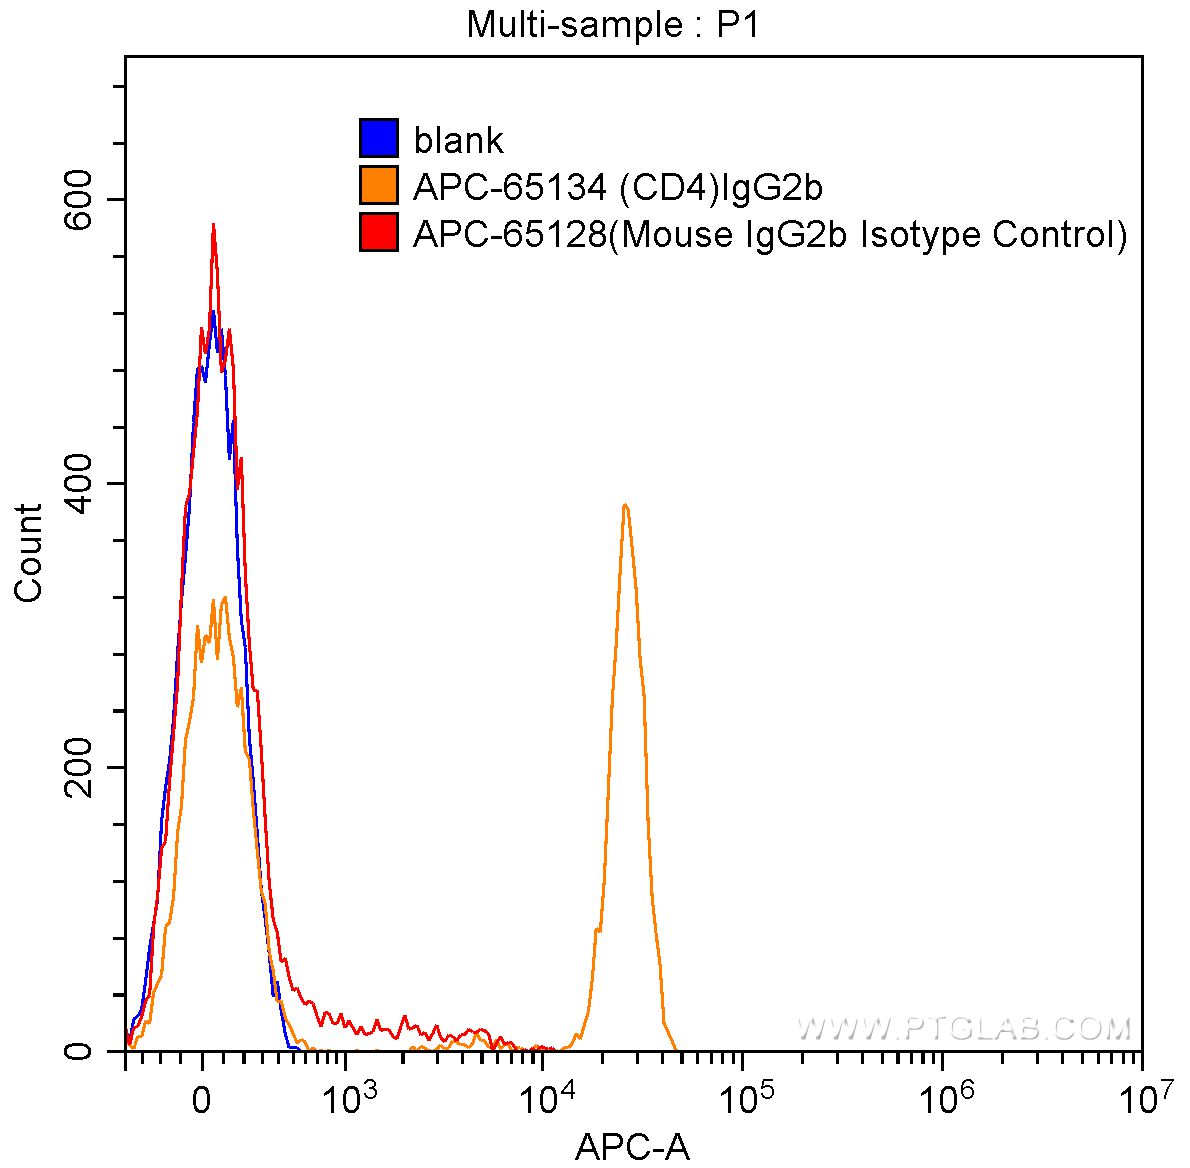 Flow cytometry validation image. 1X10^6 human peripheral blood lymphocytes were surface stained with 0.06 ug APC Mouse IgG2b Isotype Control (APC-65128, clone: MPC-11) (red) or 0.06 ug APC Anti-Human CD4 (APC-65134, clone: OKT4) (orange), or not stained (blank) (blue). Cells were not fixed.